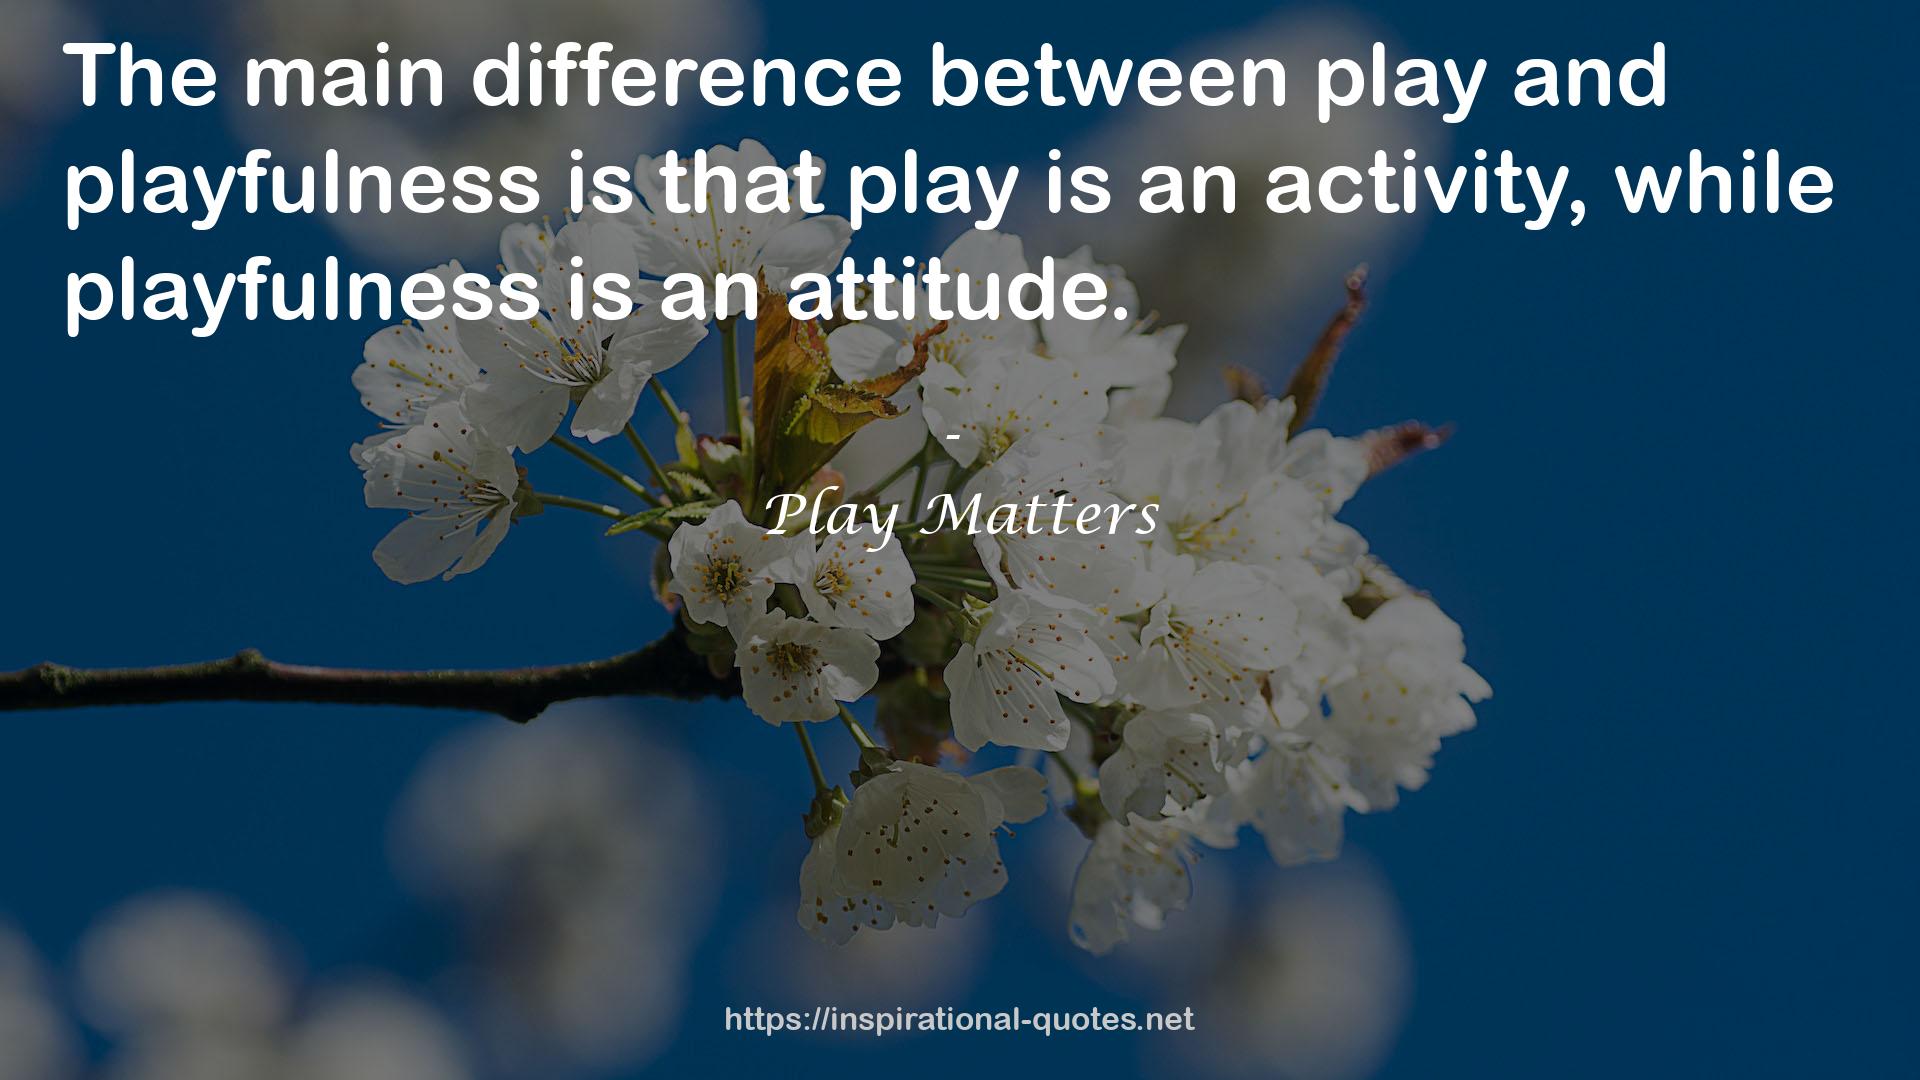 Play Matters QUOTES